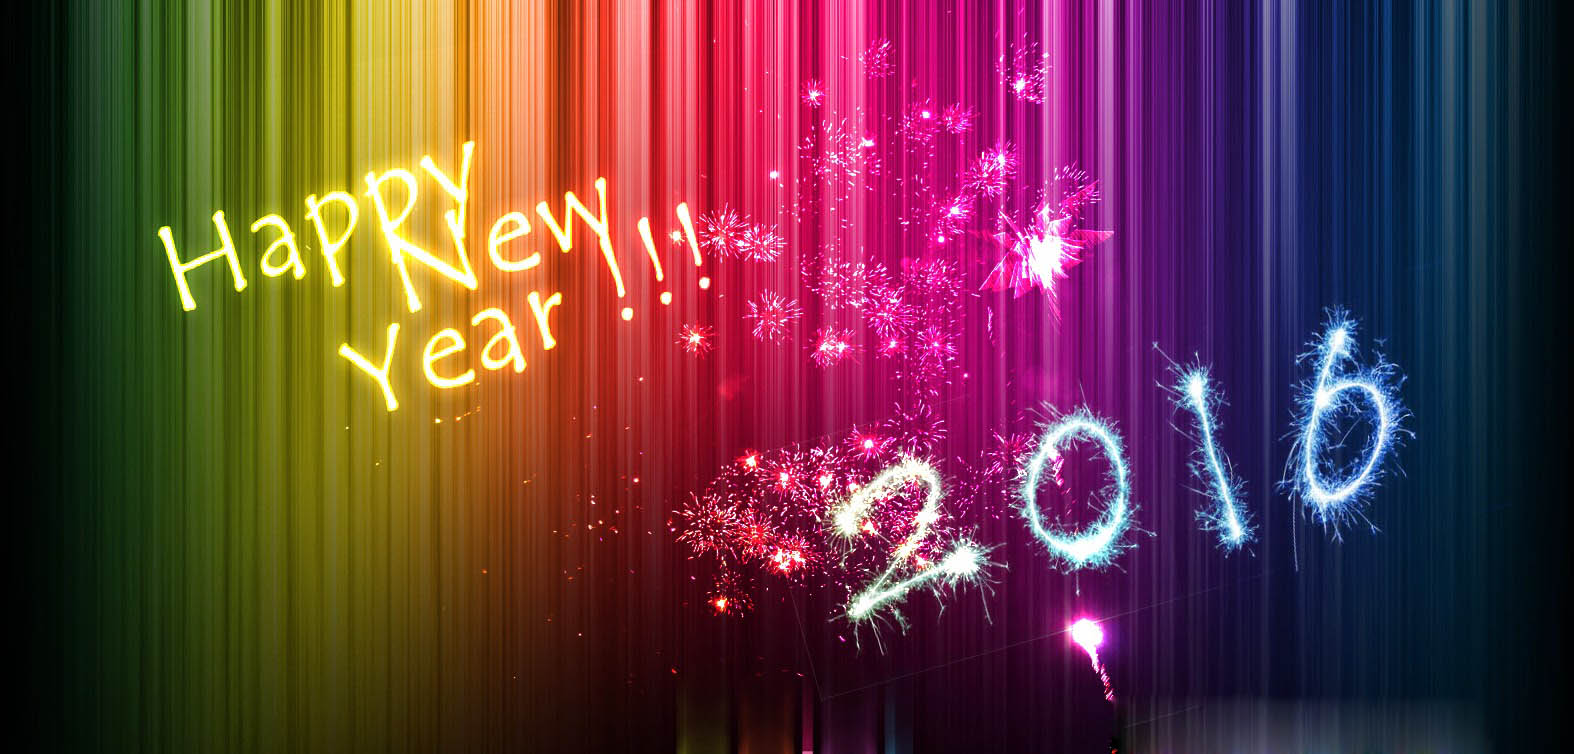 Happy New Year HD Wallpaper New Year Images Happy New Year